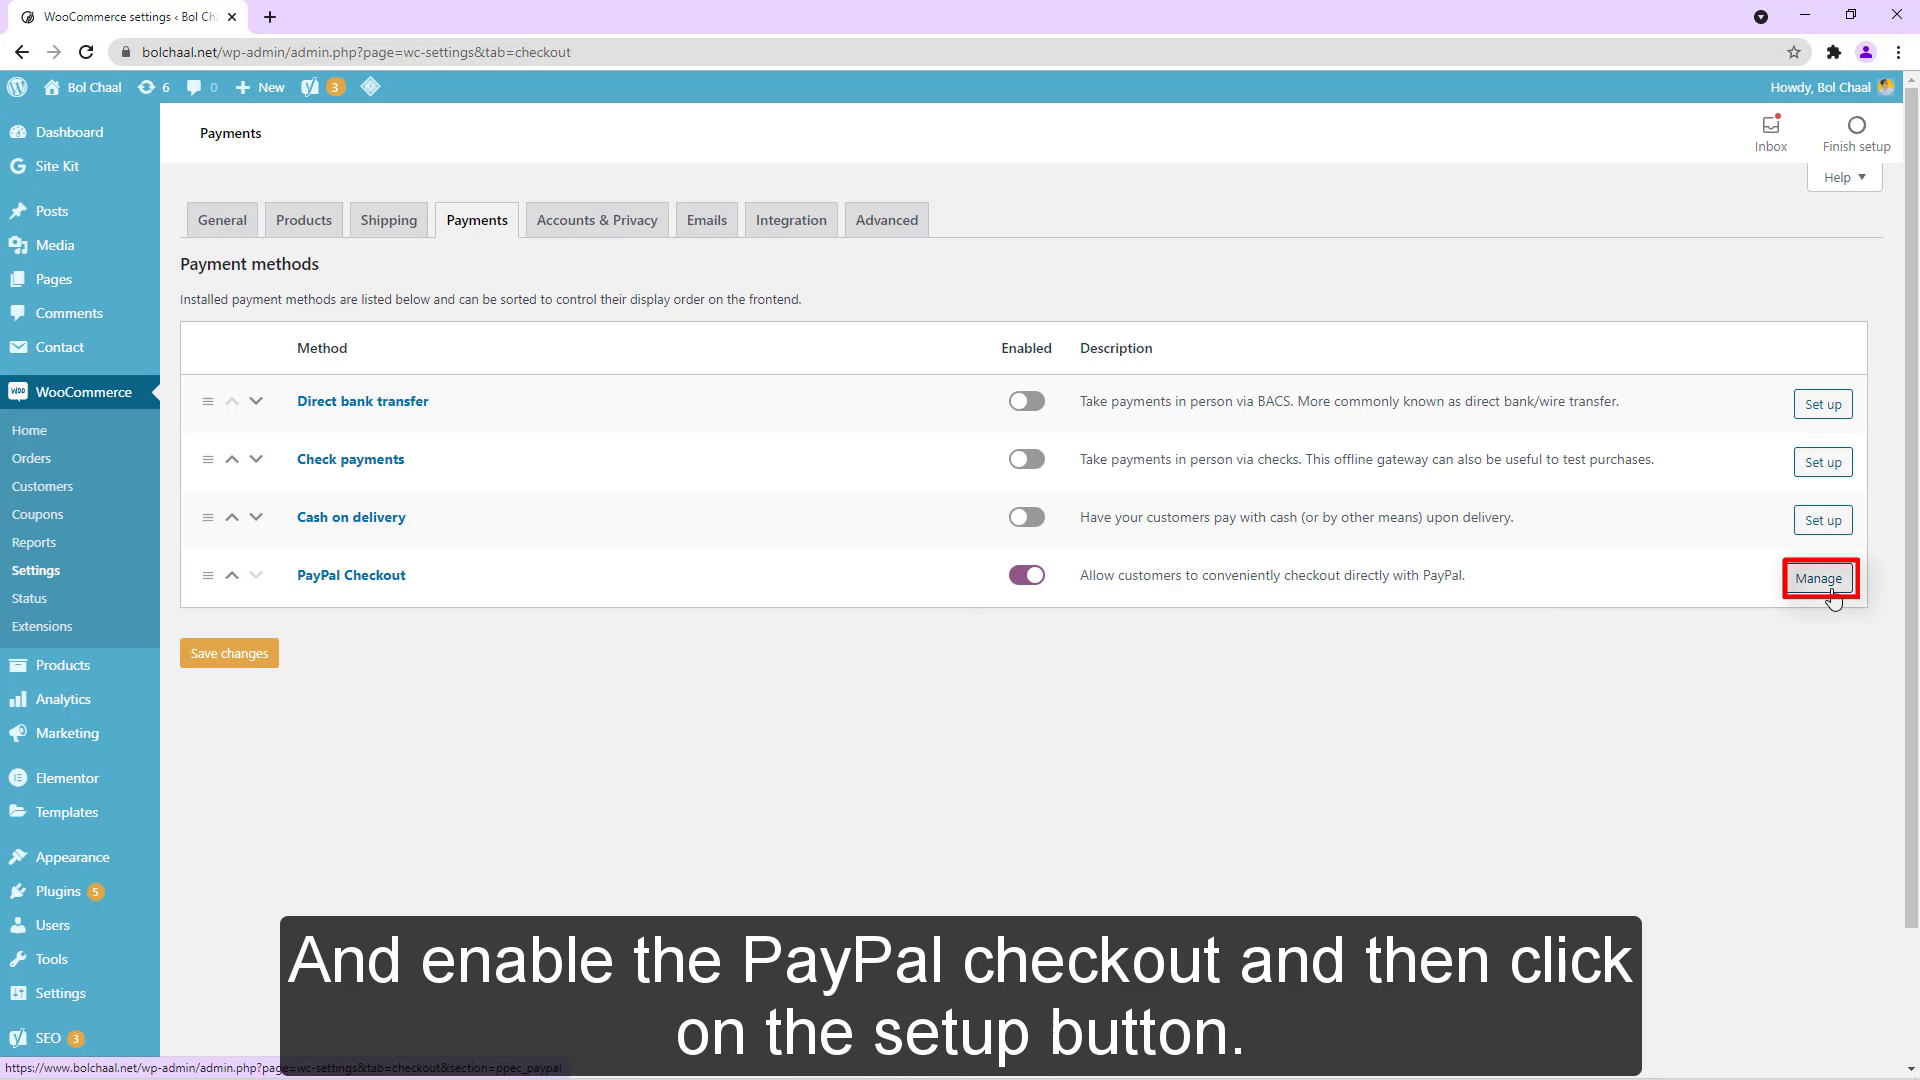 And enable the PayPal checkout and then click on the setup button.